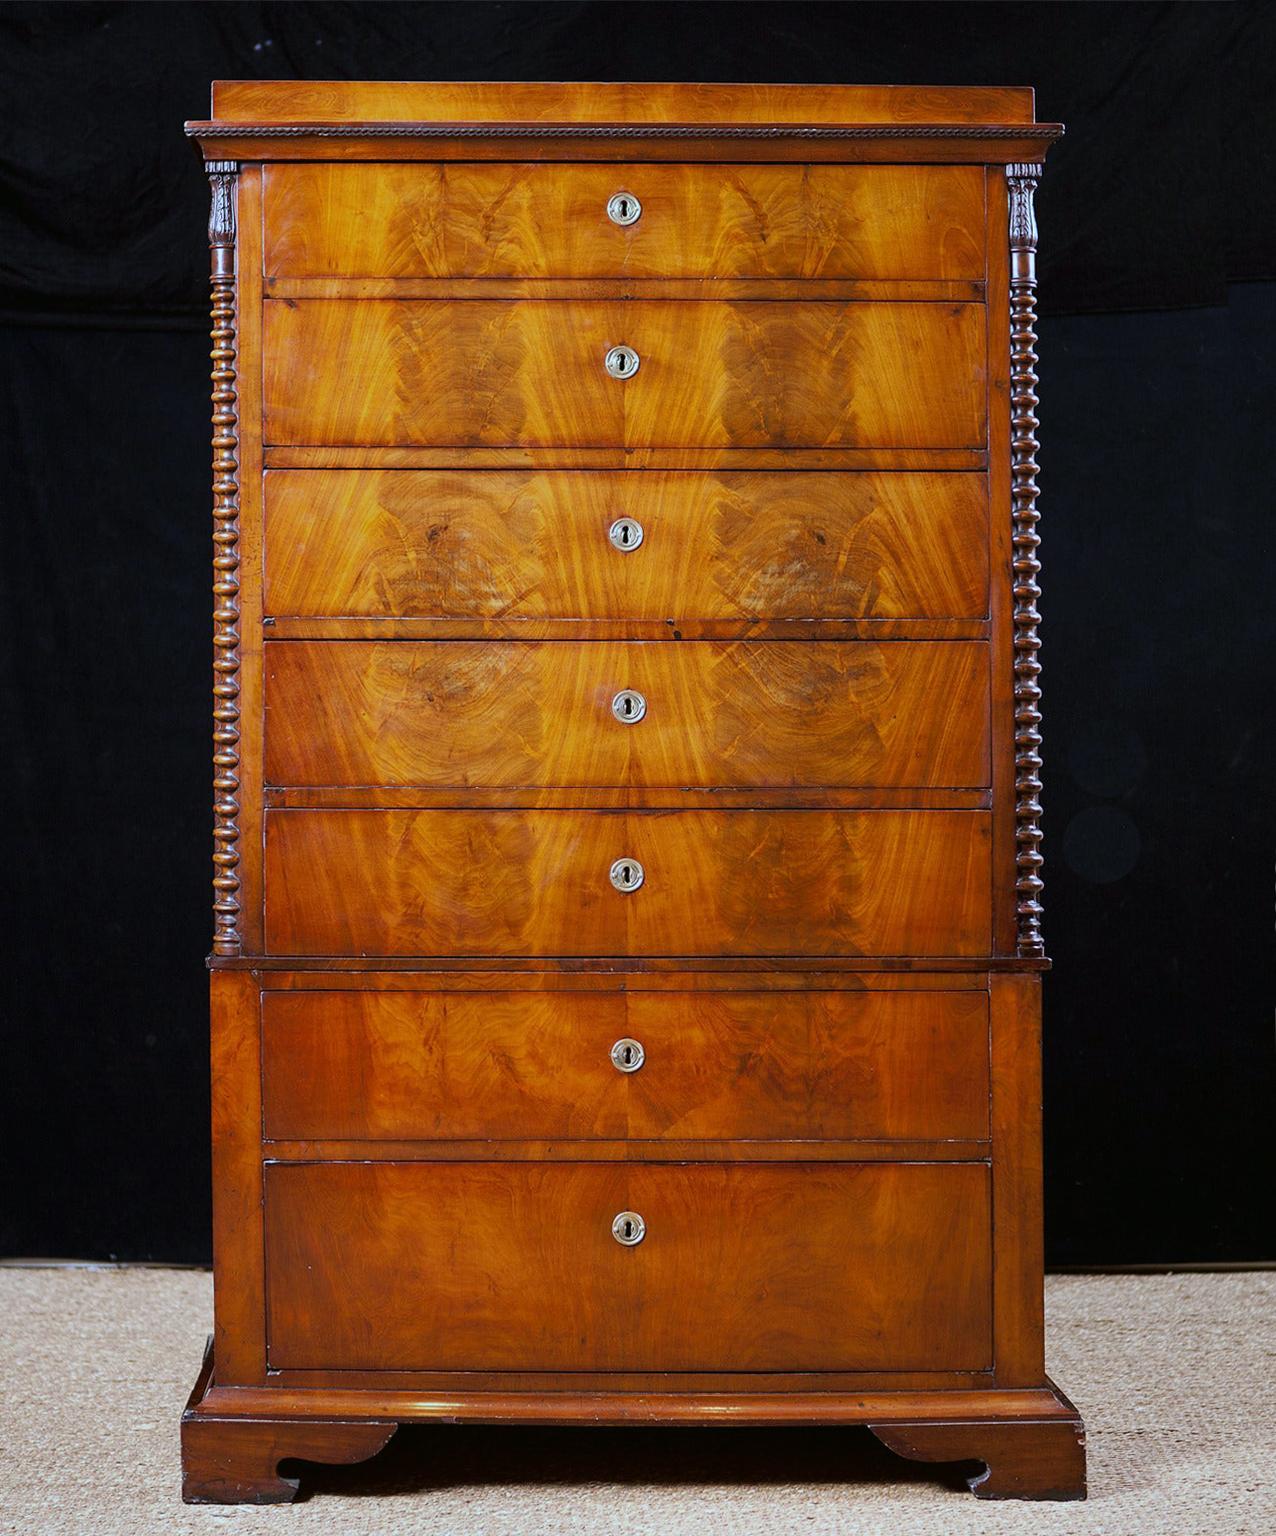 A very beautiful chest in fine West Indies/ Cuban mahogany with seven drawers. The upper part has a 3/4 spool-turned column with exquisitely carved capitals embellished with carved acanthus leaves. Chest rests on bracket feet. Denmark, circa 1825.